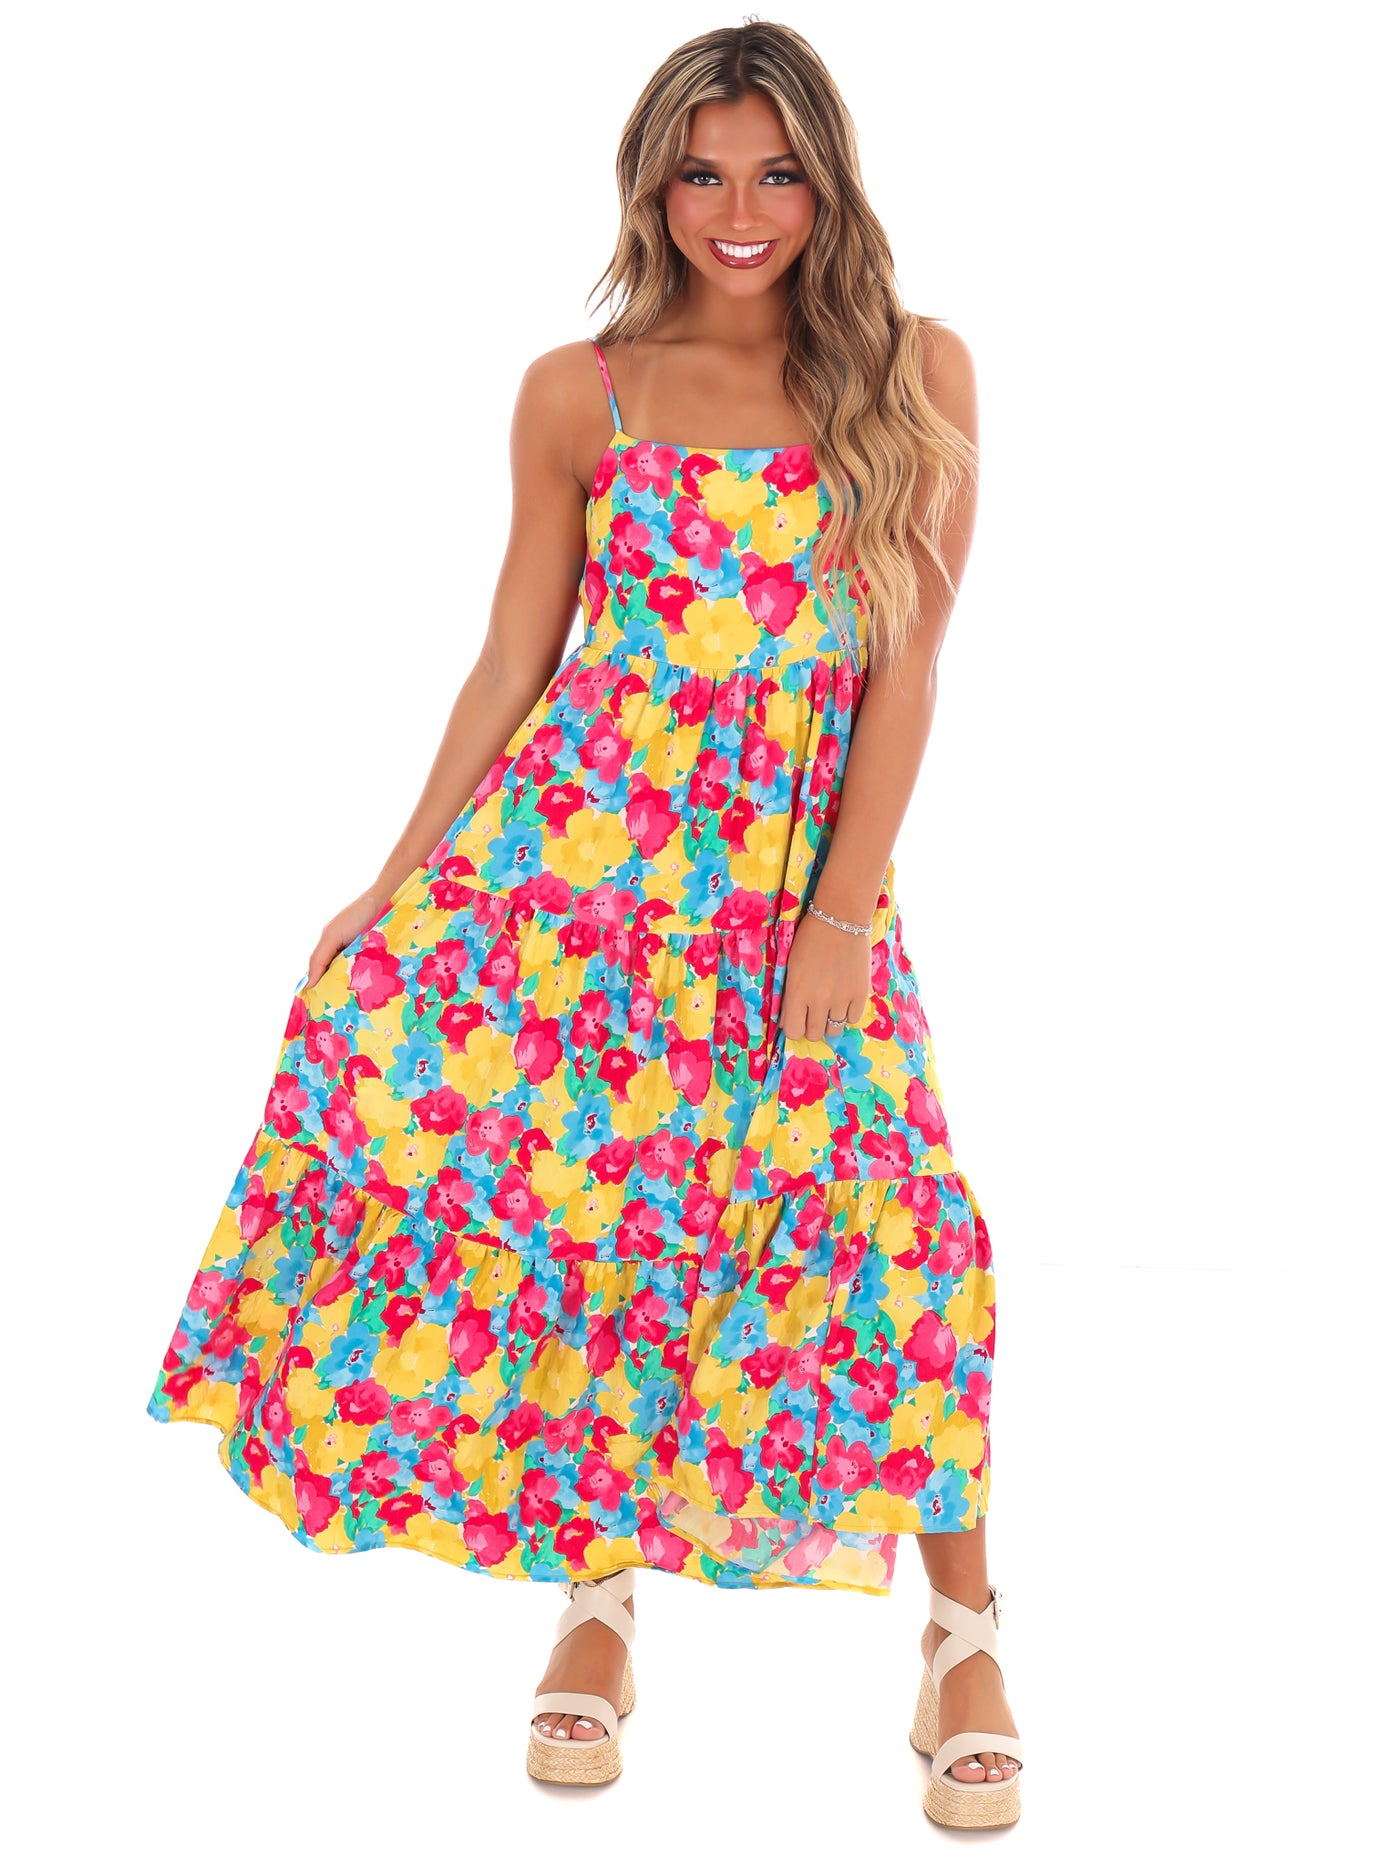 Southern Girl Floral Maxi Dress